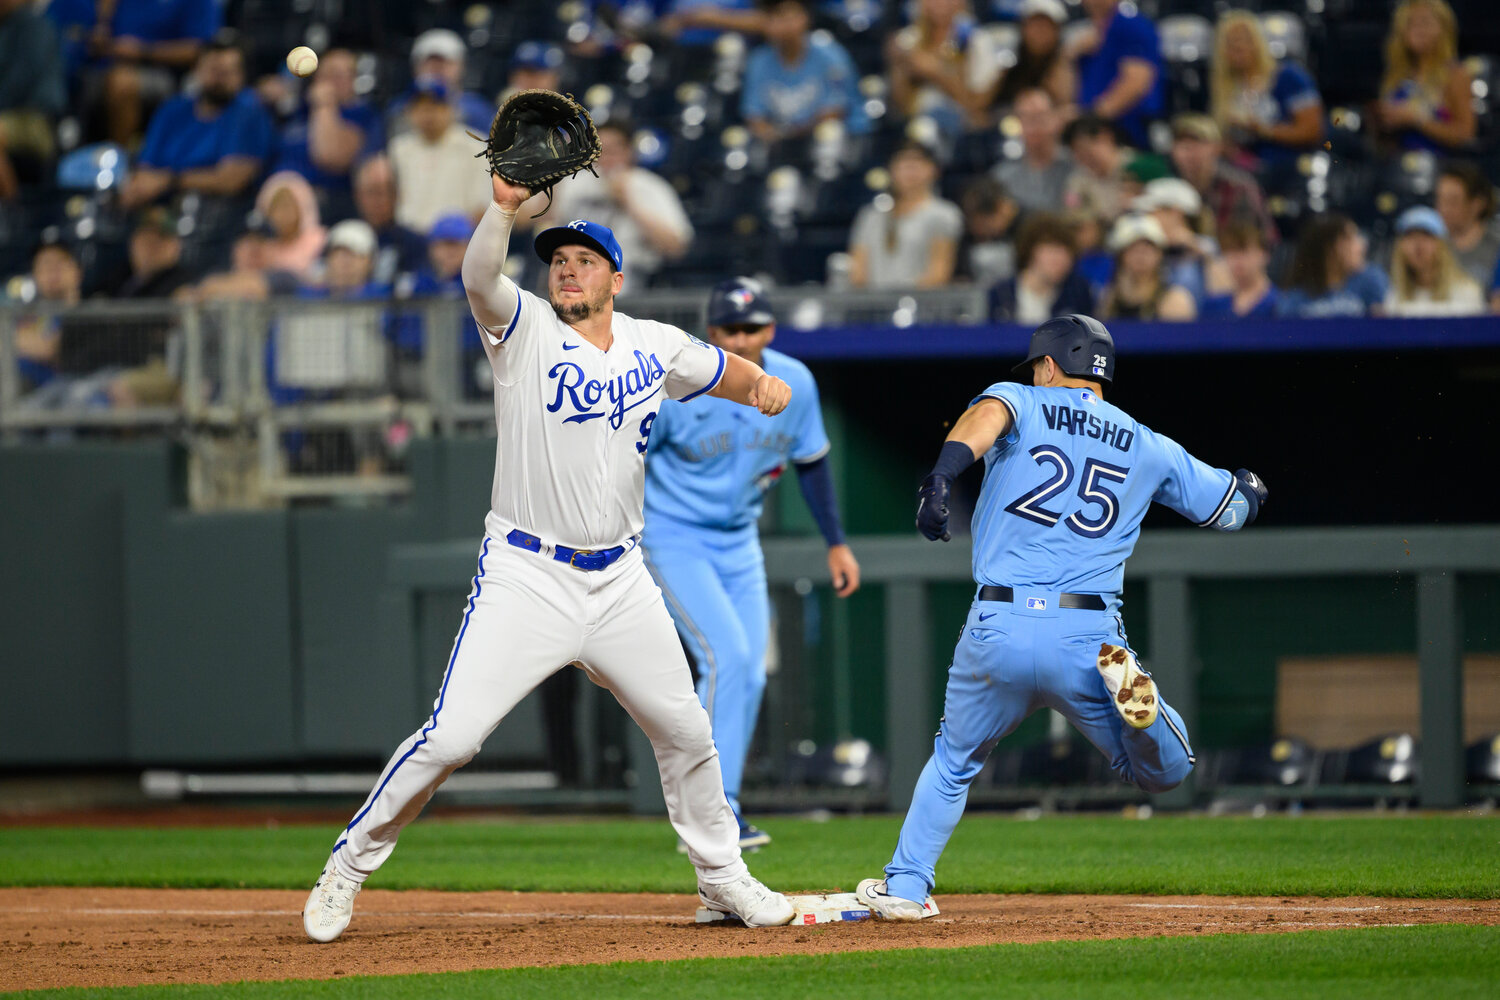 Toronto Blue Jay's Daulton Varsho (25) is safe at first on a late throw to Kansas City Royals first baseman Vinnie Pasquantino (9) during the eighth inning of their game on Tuesday in Kansas City, Mo. (AP Photo/Reed Hoffmann)